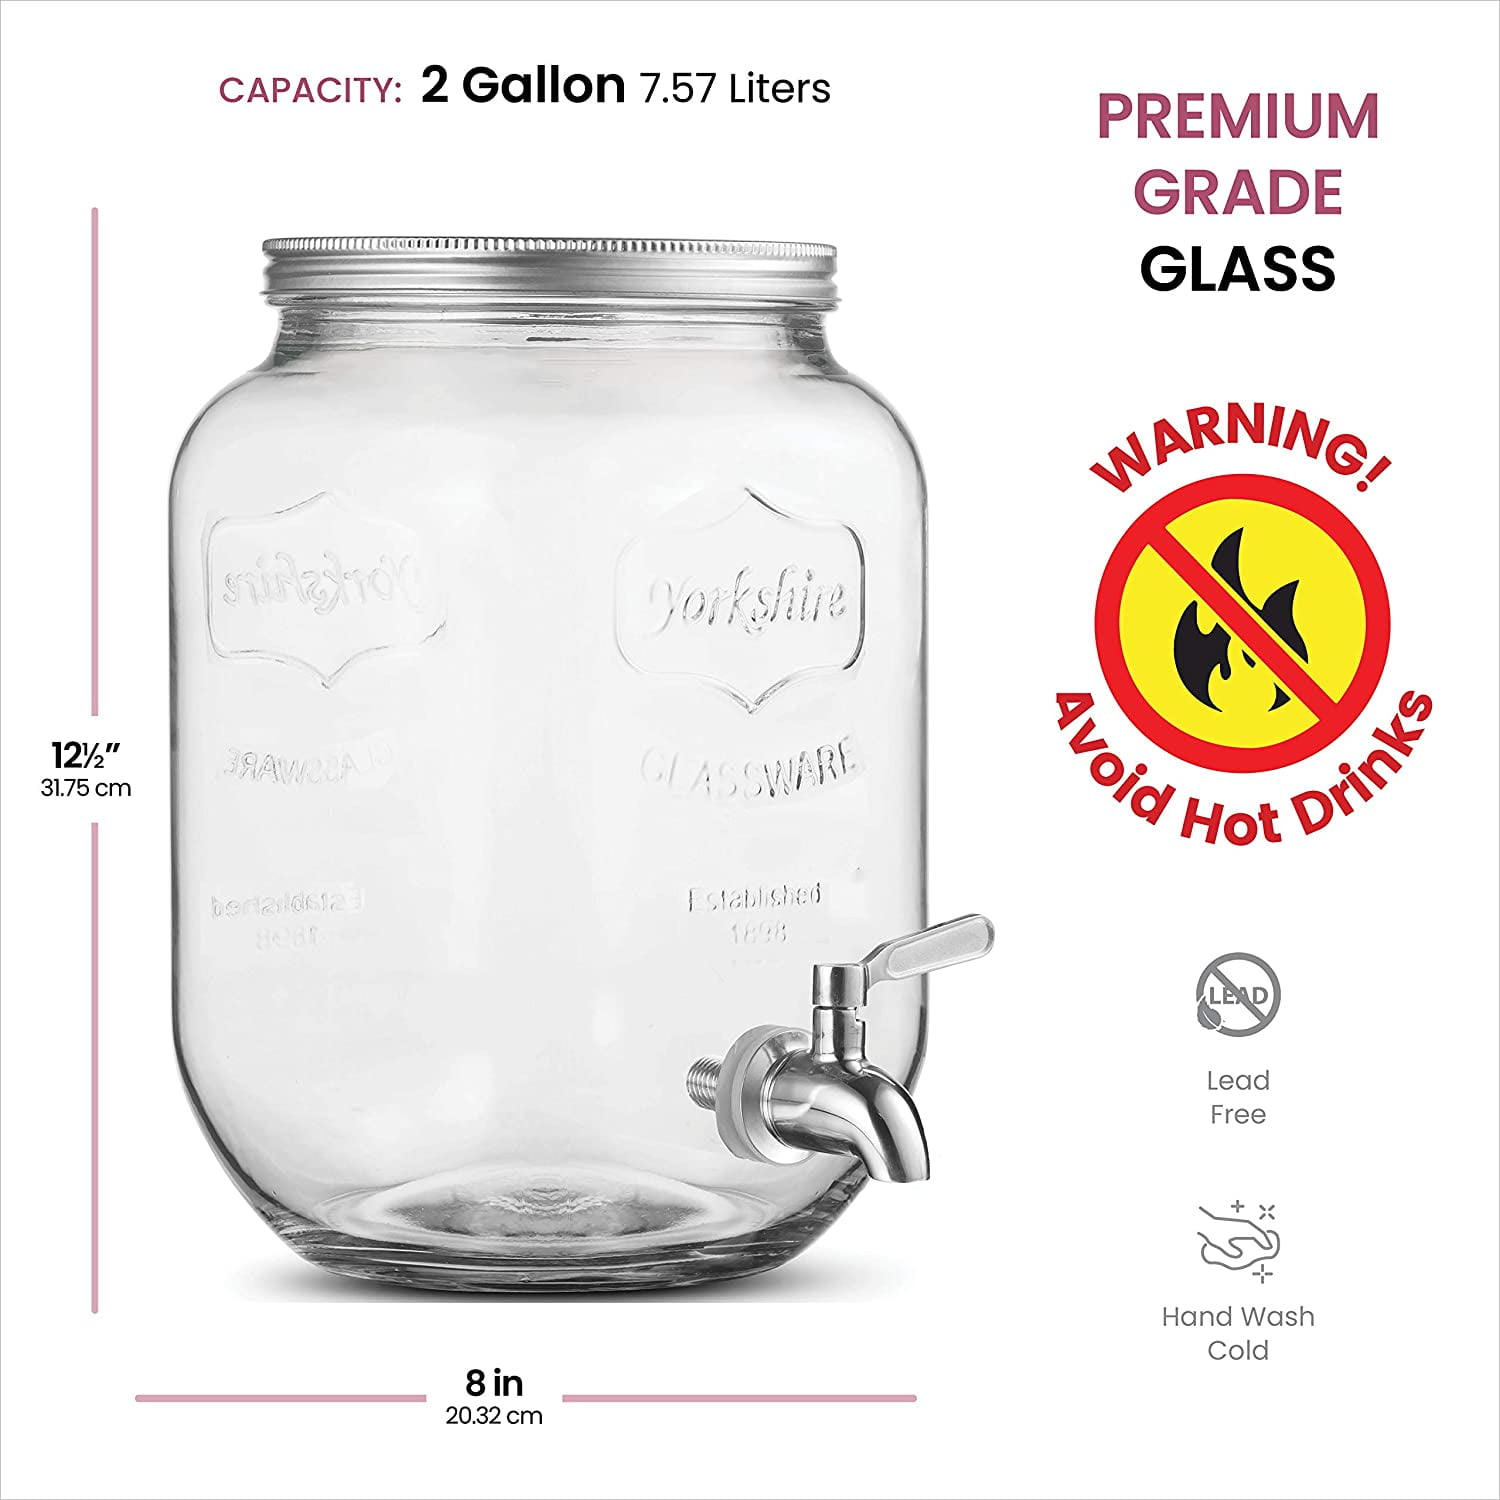 Glass Beverage Dispenser with Infuser and Stainless Spigot - 8L / 2.1 gal.